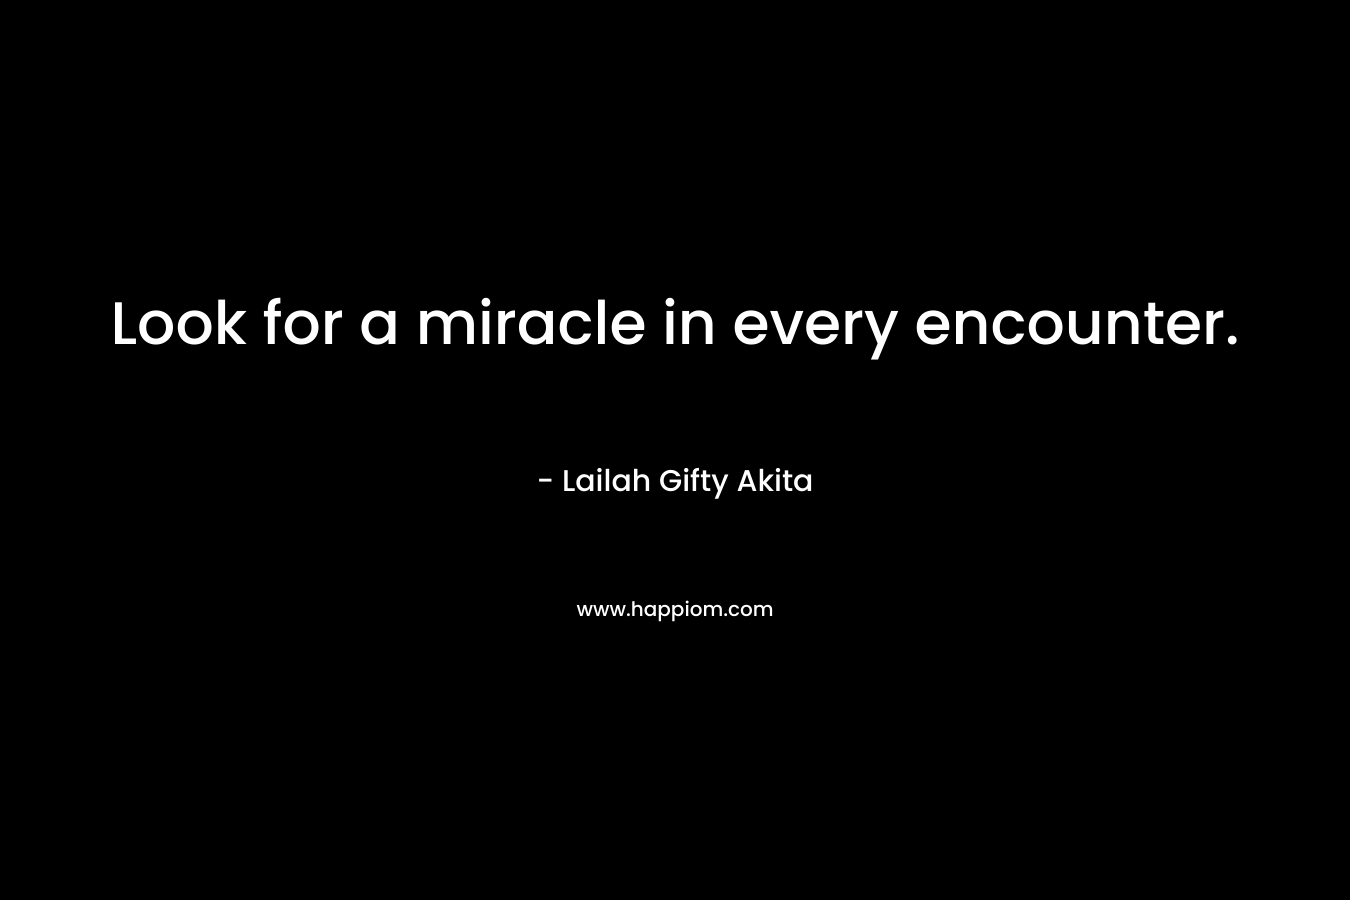 Look for a miracle in every encounter.